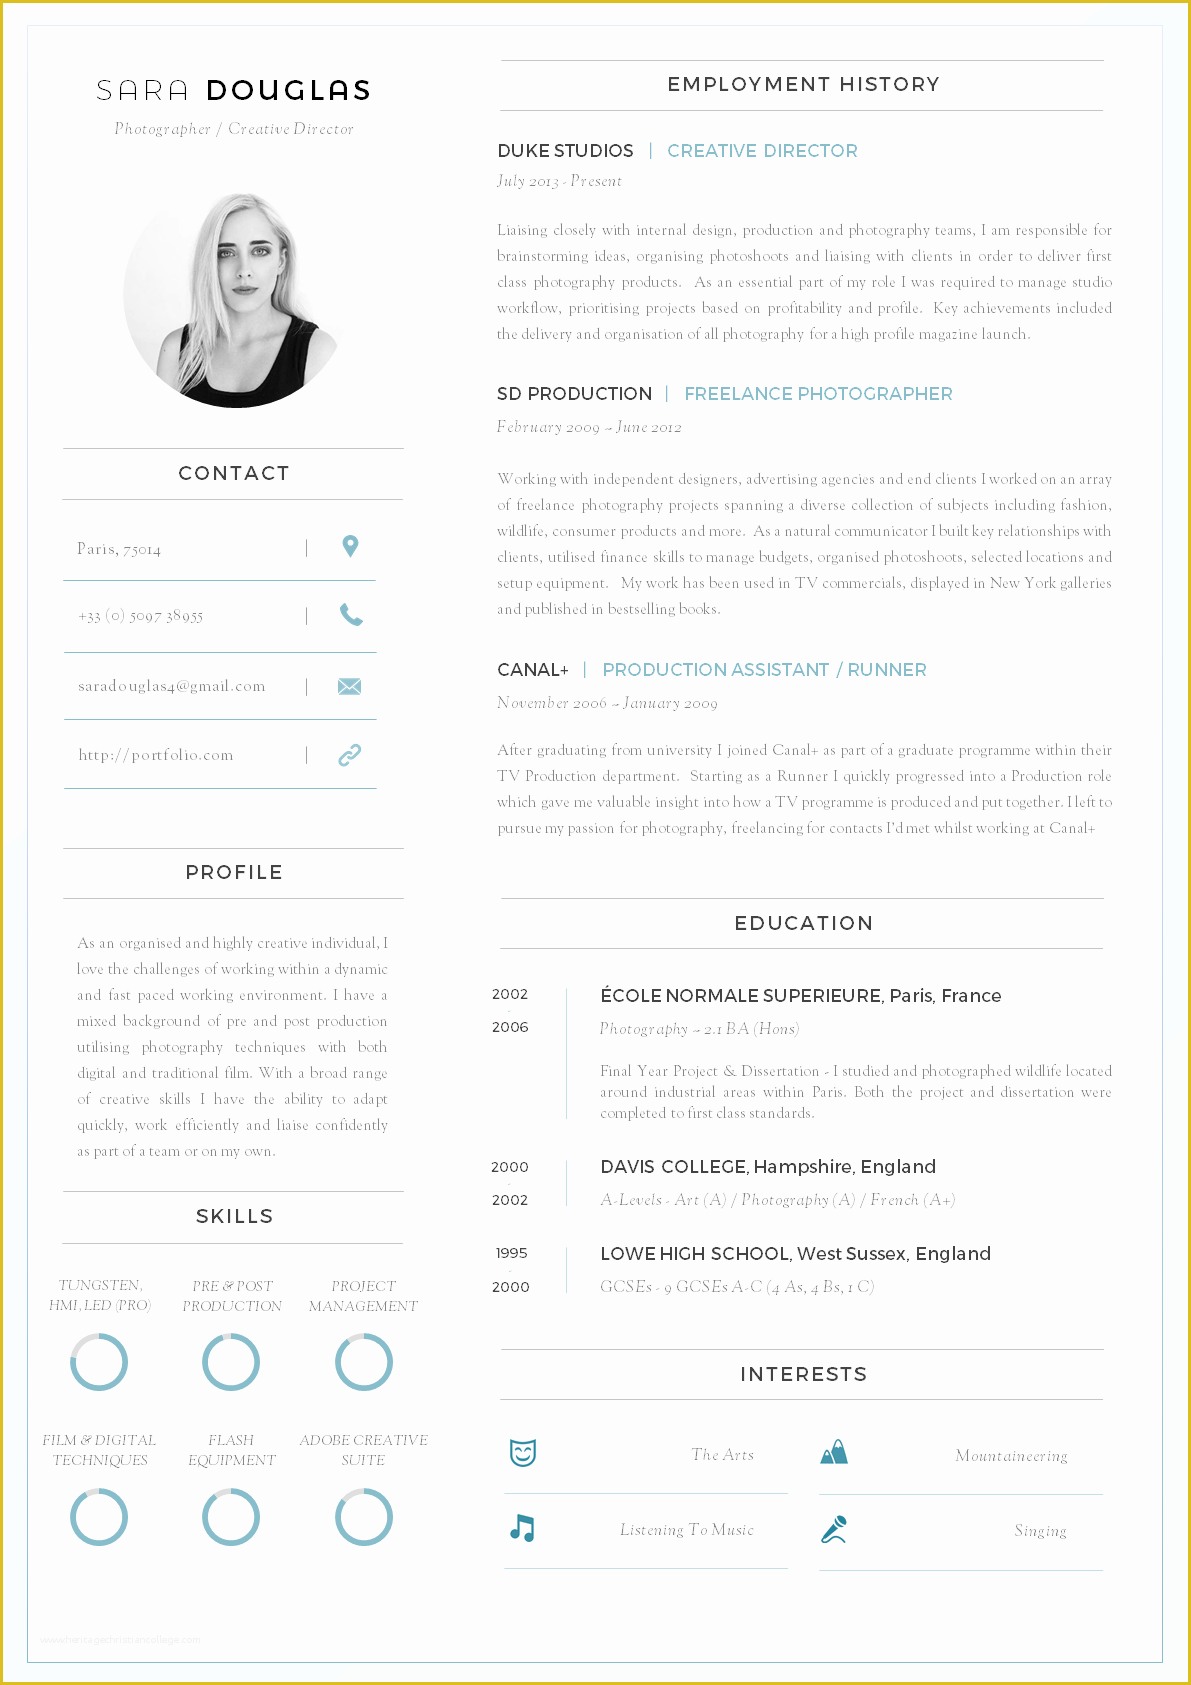 View Free Resume Templates Of 43 Modern Resume Templates Heritagechristiancollege